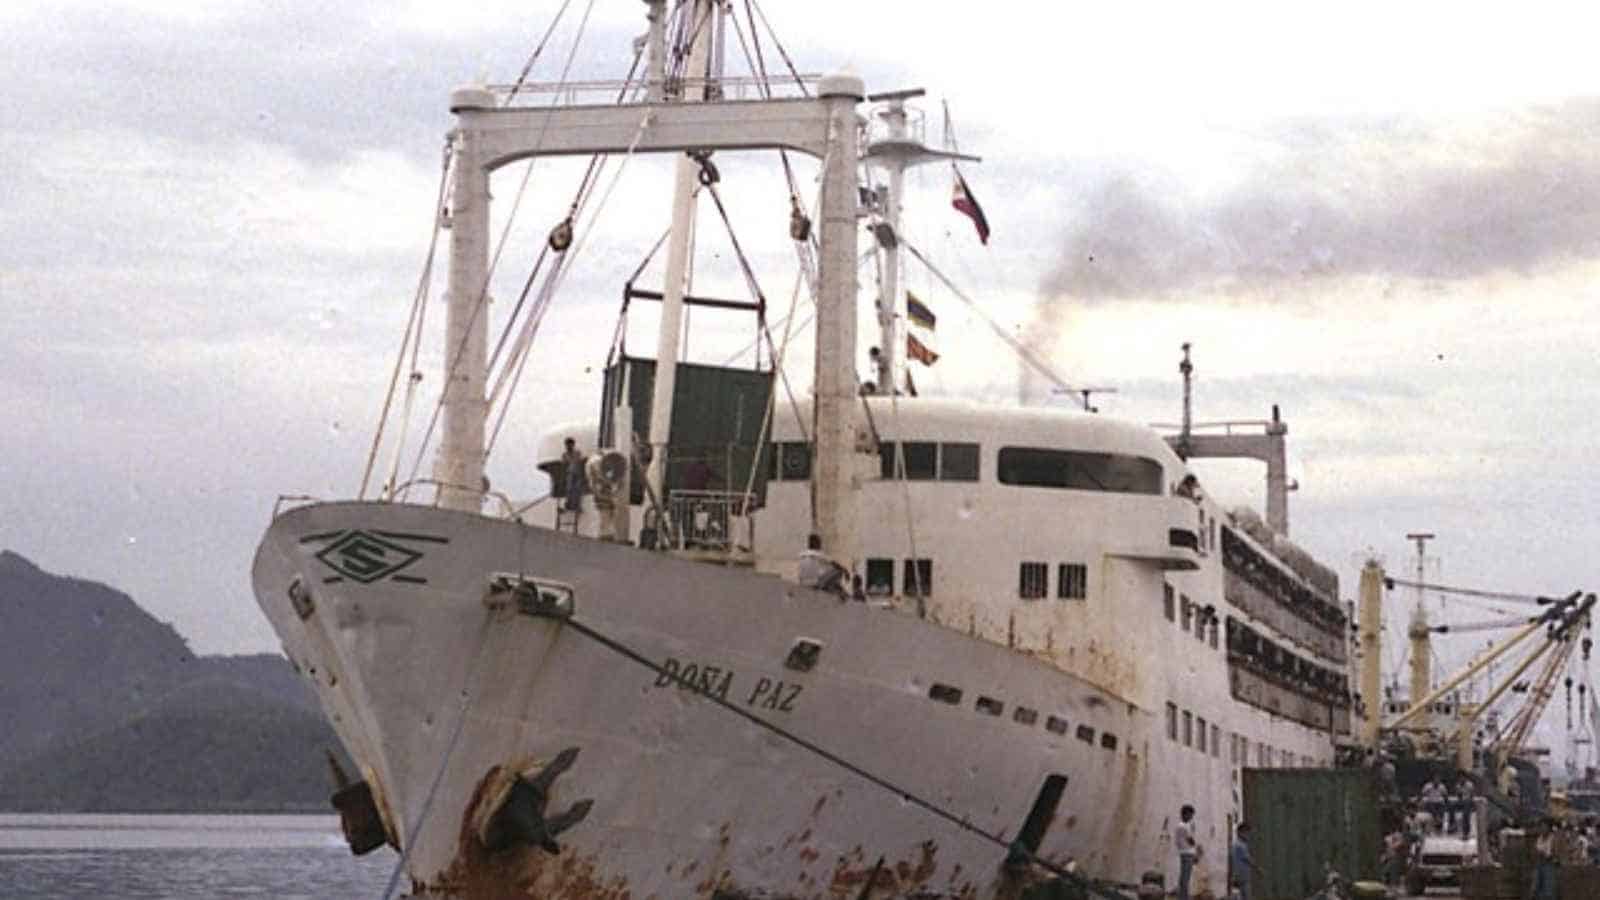 <p>On December 20, 1987, the Philippine passenger ferry Dona Paz collided with an oil tanker, resulting in a massive fire that claimed the lives of over 4,000 people. The lack of life jackets and overcrowding on board contributed to the high death toll.</p><p>The Dona Paz disaster was a result of several factors, including a lack of safety regulations, inadequate crew training, and failure to enforce passenger limits. It also exposed the corruption within the Philippine maritime industry. It was discovered that the ferry operator had been operating without a valid license and had bribed government officials to overlook safety violations. This event shed light on the need for stricter regulations and enforcement of laws in the maritime industry, calling for accountability from both vessel operators and government agencies.</p>